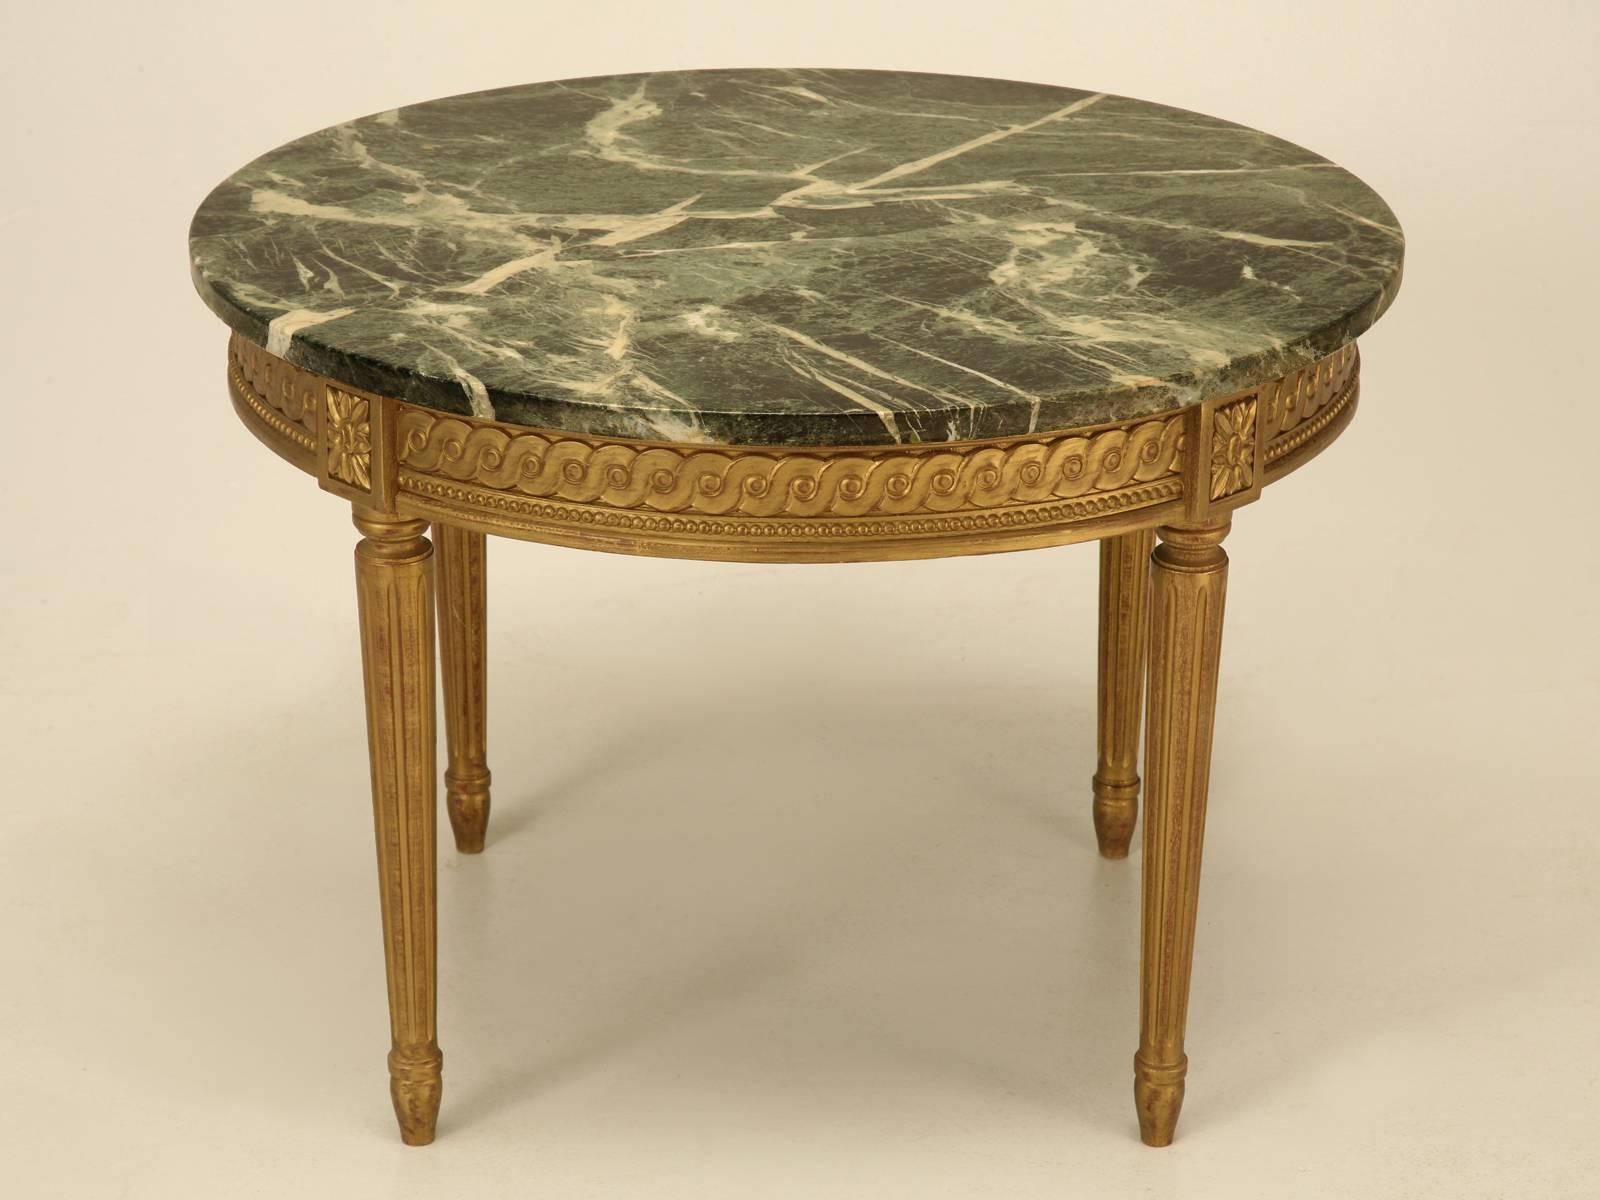 Unusual Louis XVI style gilded coffee table with a marble top in nice original unrestored condition.